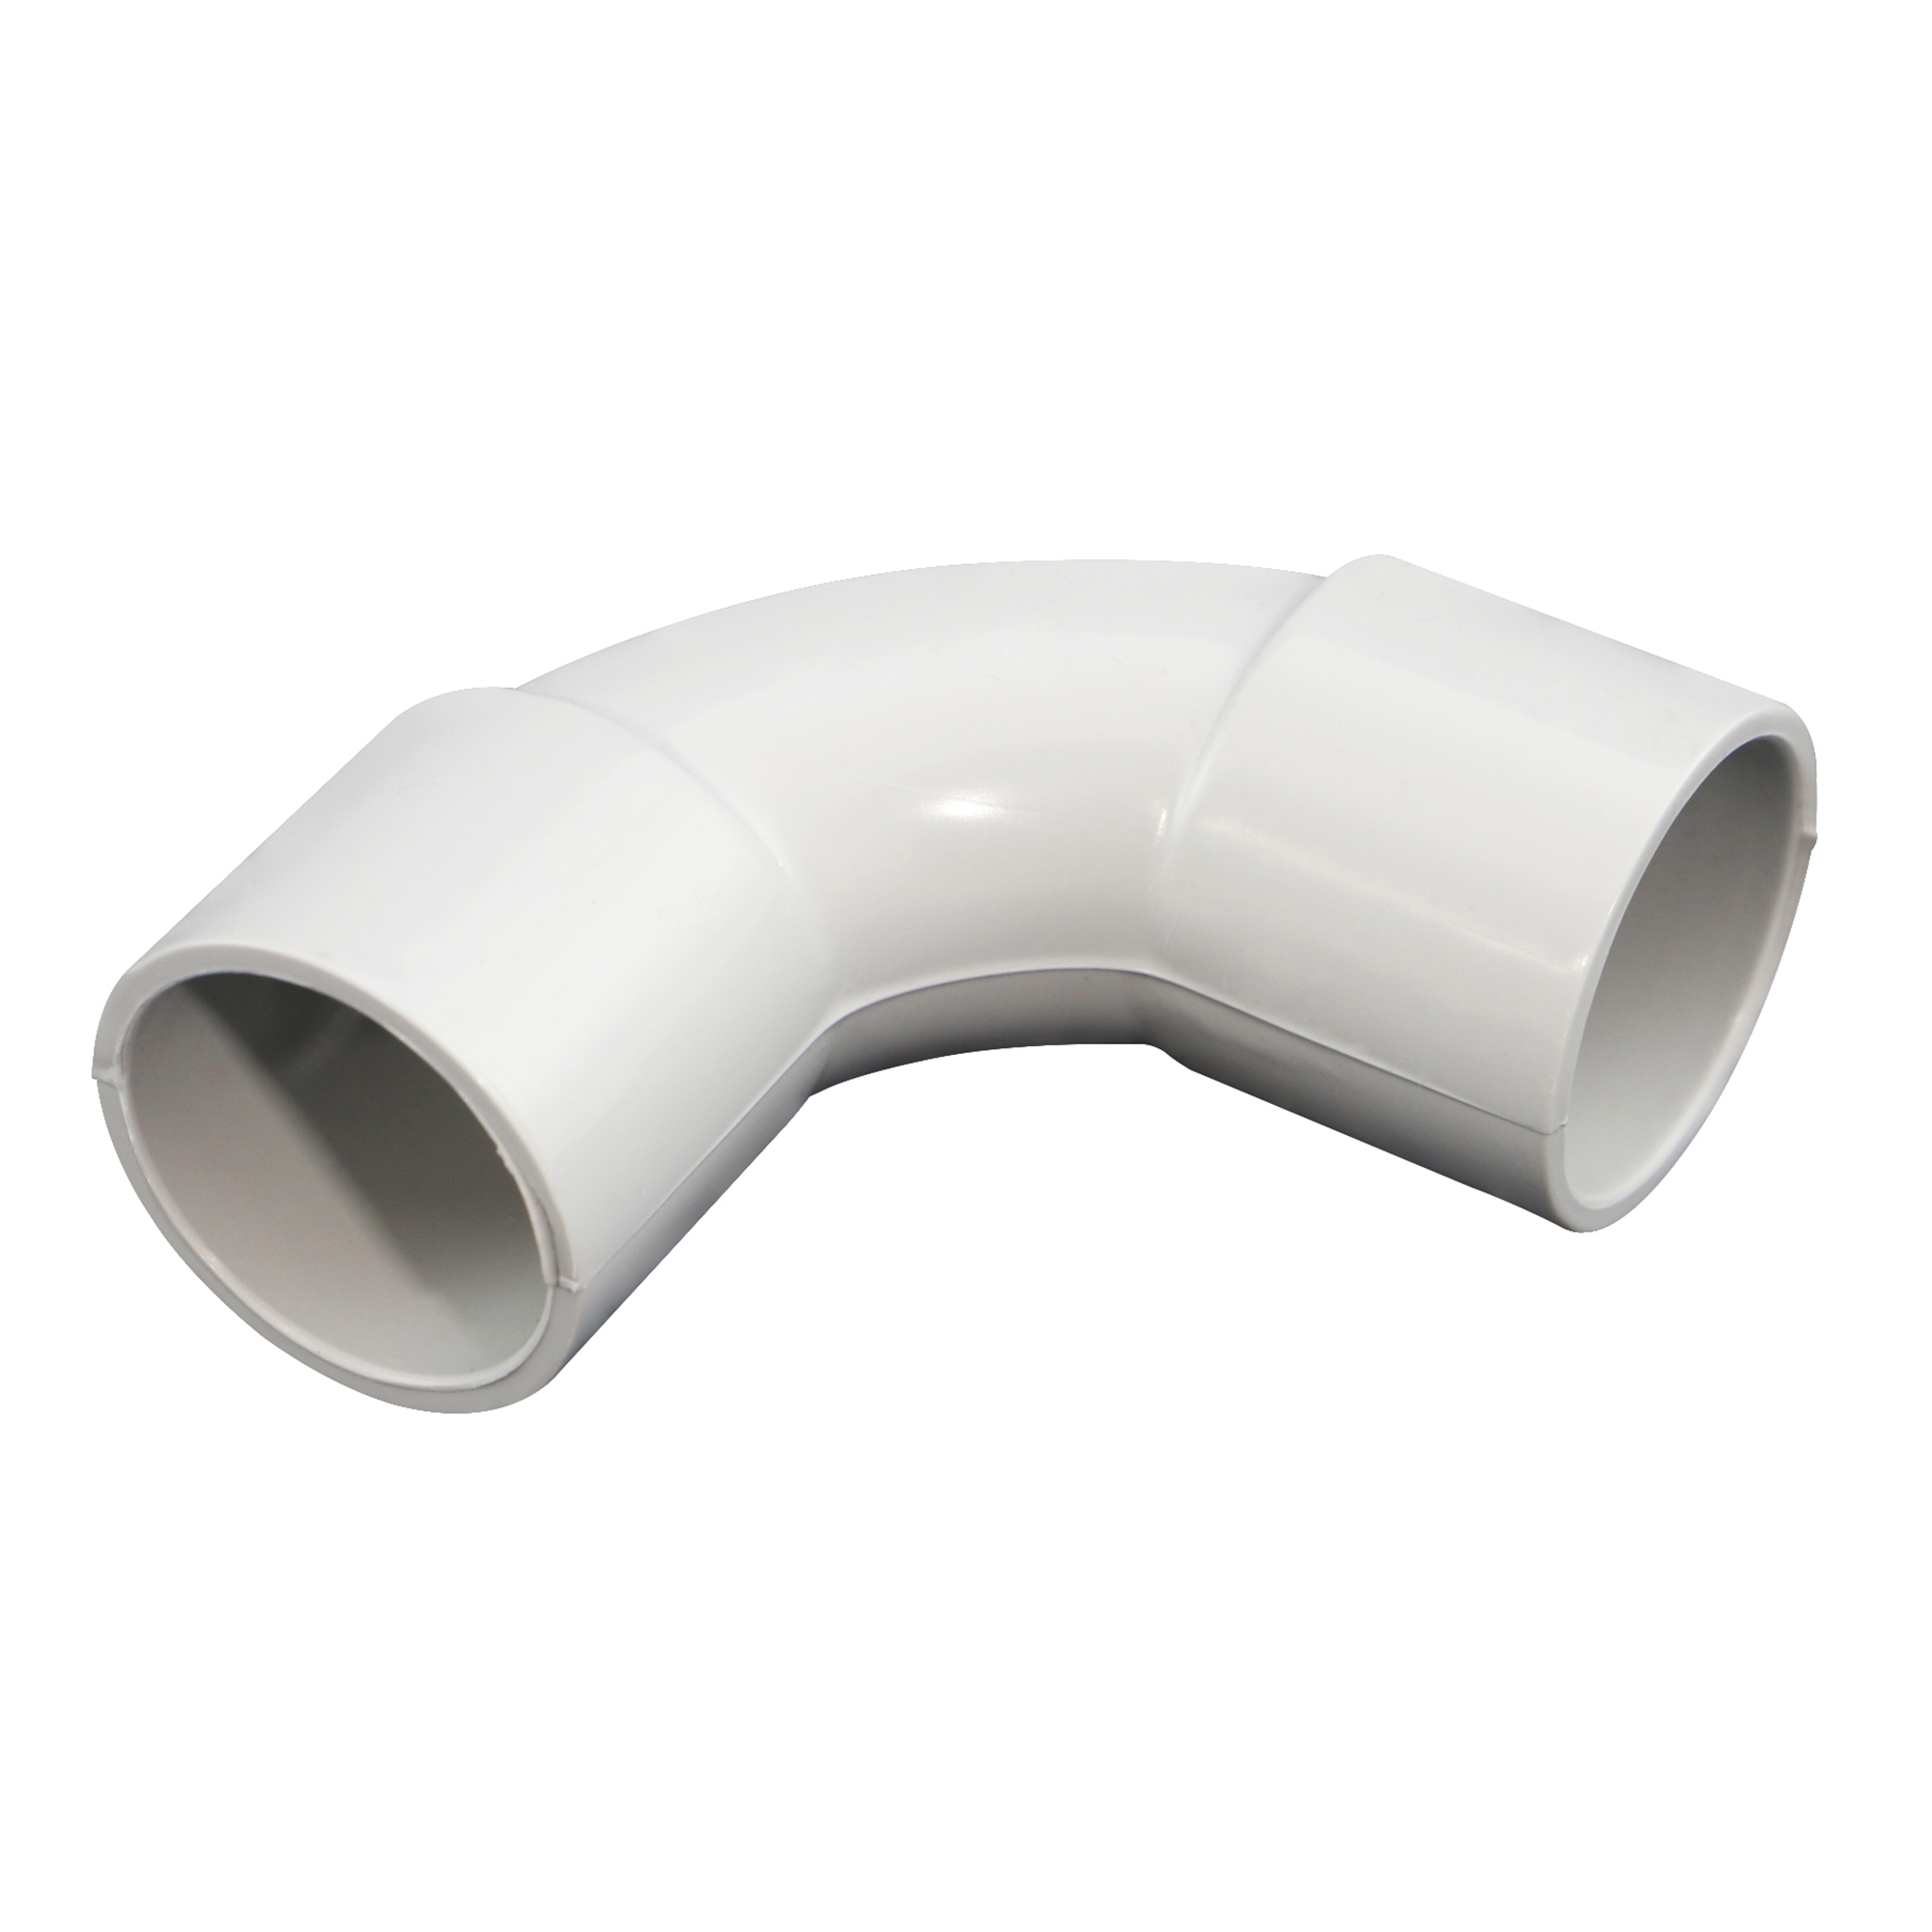 20 mm Solid Elbow